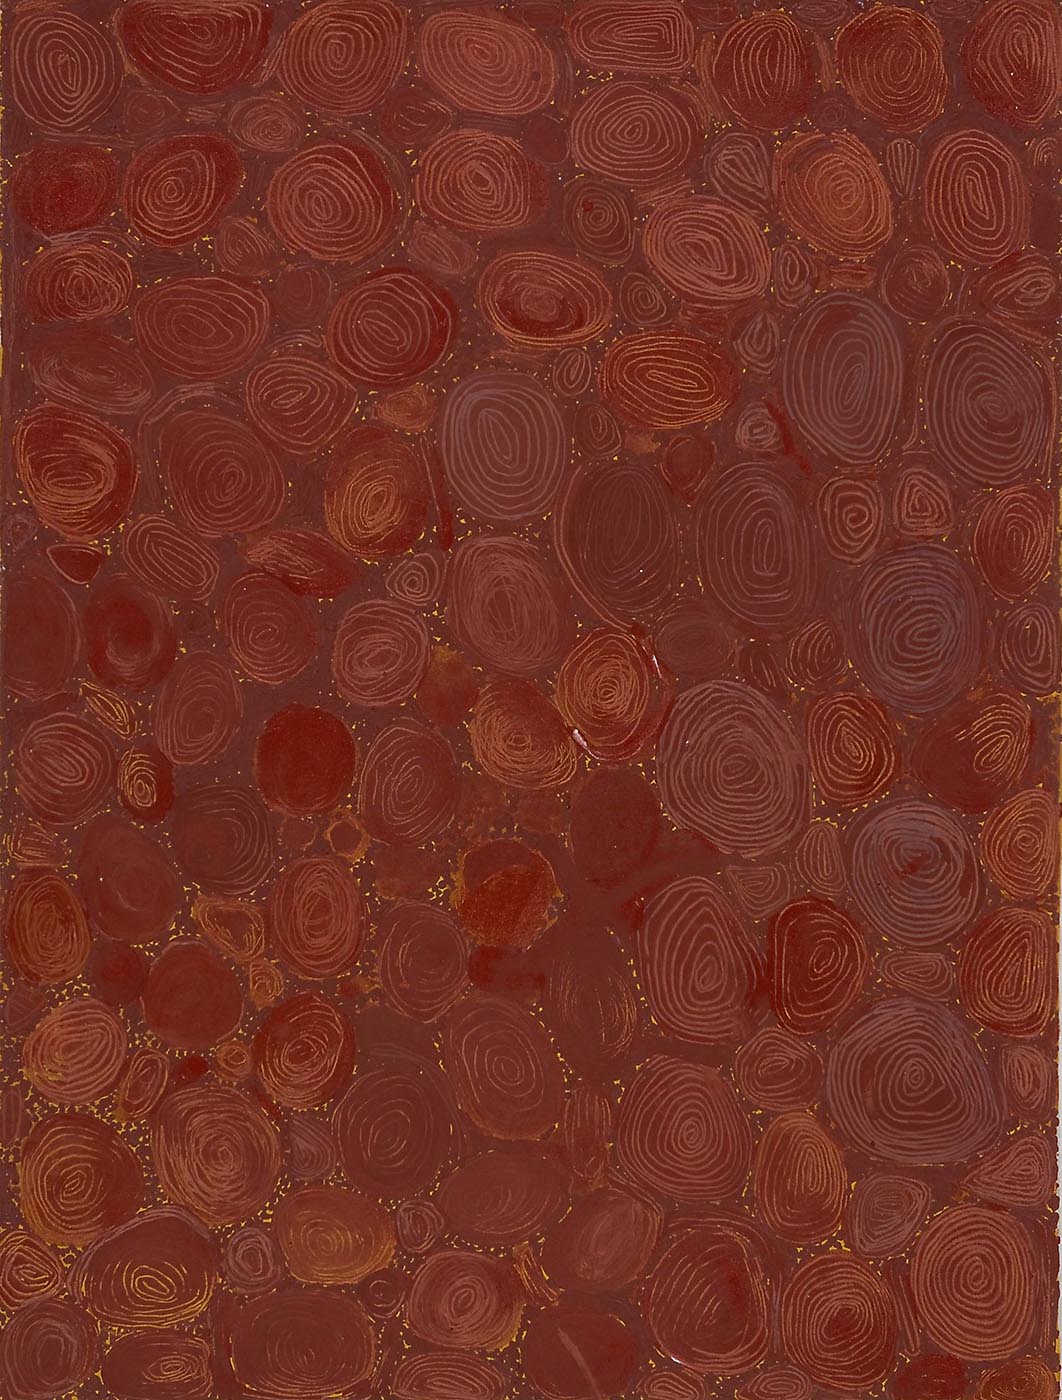 A textured chocolate brown toned painting on canvas with a design of concentric ovals which have been scribed with a blunt instrument into the layer of paint. In the small spaces between the ovals are raised dots in brown.